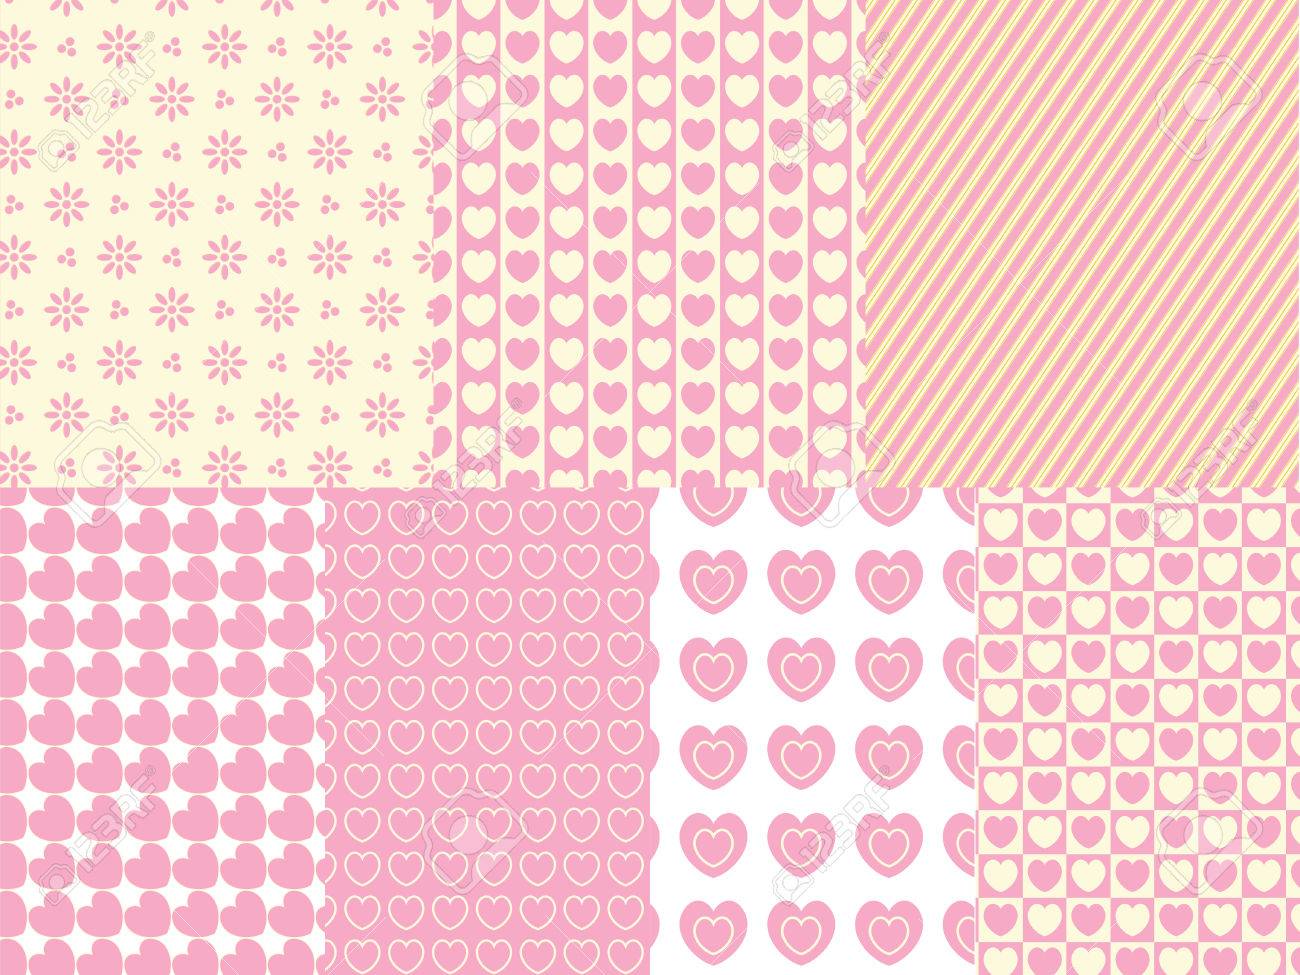 Heart And Eyelet Background Swatches In Shades Of Pink Gold